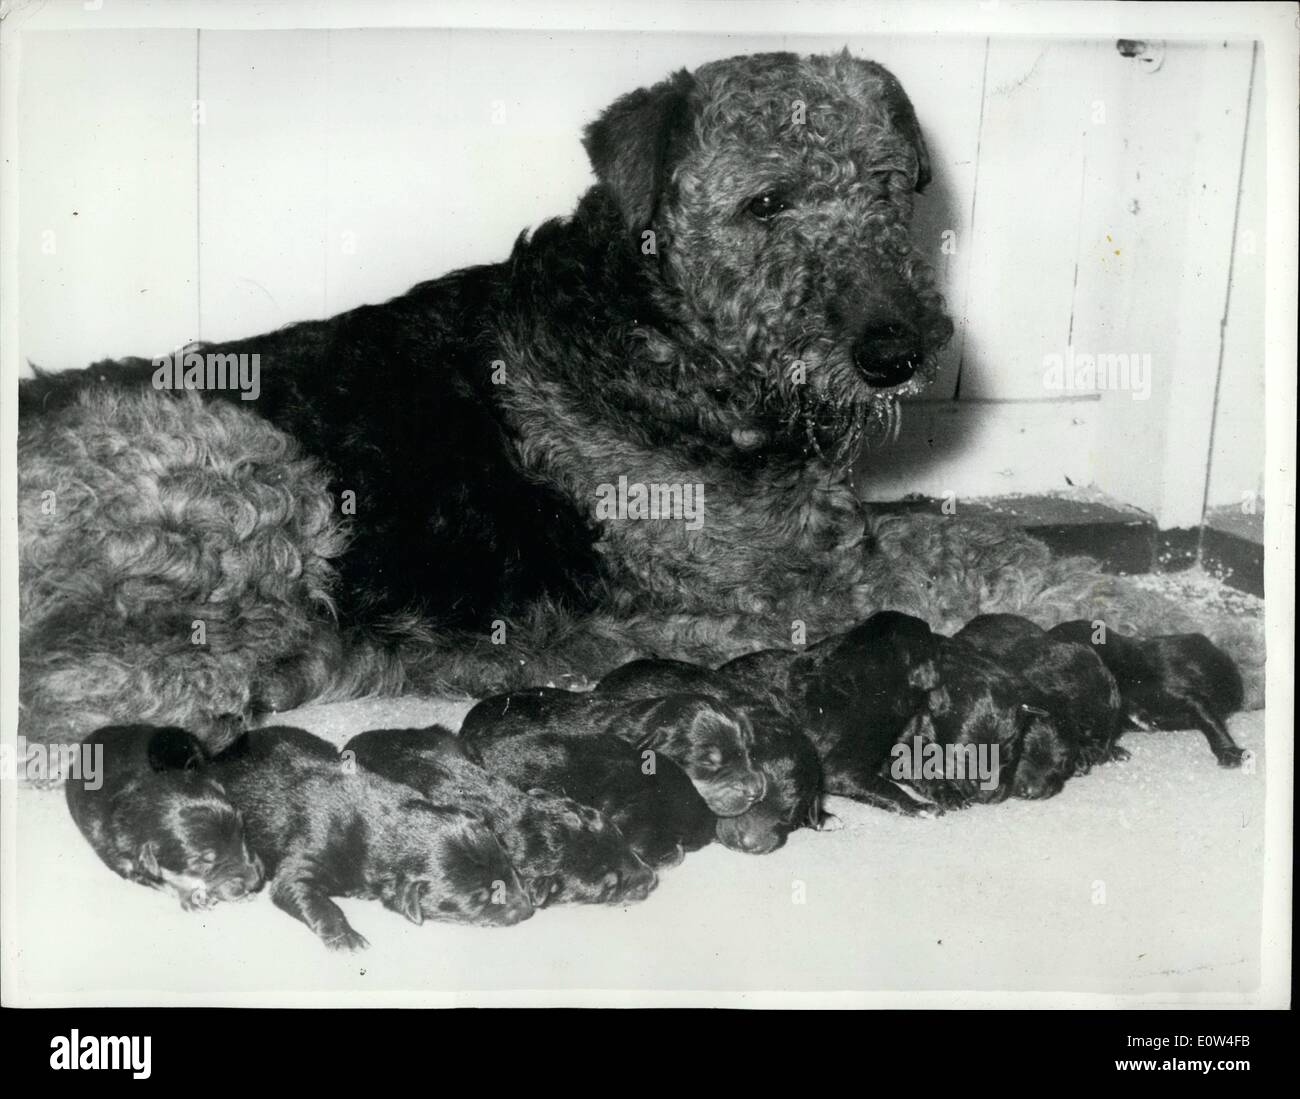 Apr. 04, 1961 - Airedale Is Found In Rabbit Hole - With 11 Pups: A valuable airedale dog, Jean, which bolted from Carlisle railway station on a trip from Kilmarnock to the Midlands nine weeks ago, was found yesterday huddled in a rabbit hole with - eleven two -day old puppies. Police and R.S.P.C.A. Inspector, Harry Brown found Jean and her new family in a field near Carlisle. Squeaks were heard coming from a rabbit hole. Chief Inspector Brown said: ''We dug very carefully and found a football team of puppies. jean was ravenous with hunger. After a good meal she was a different dog'' Stock Photo